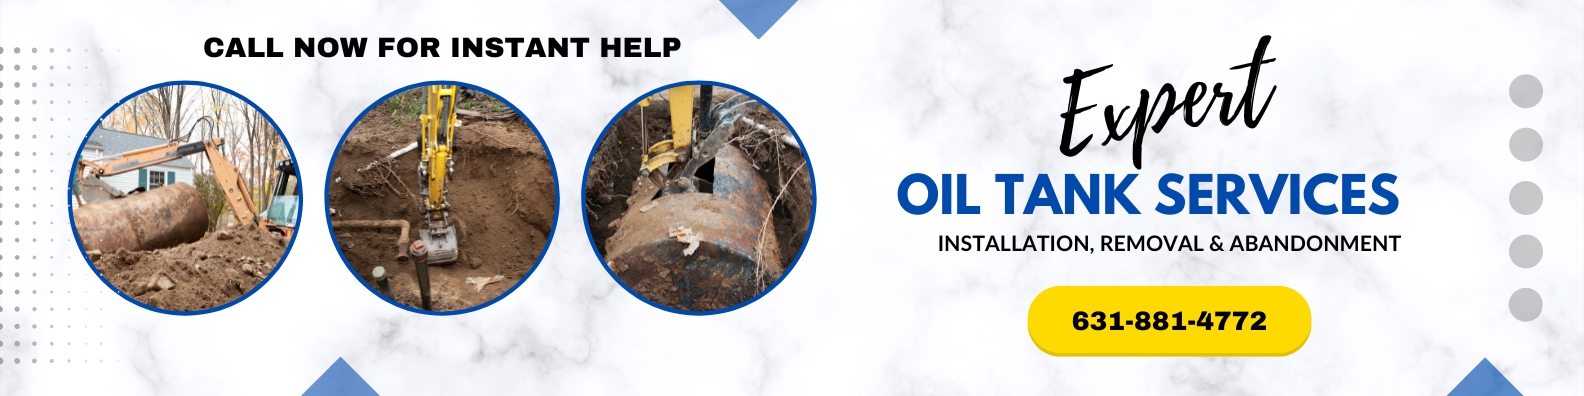 oil tank services suffolk county ny